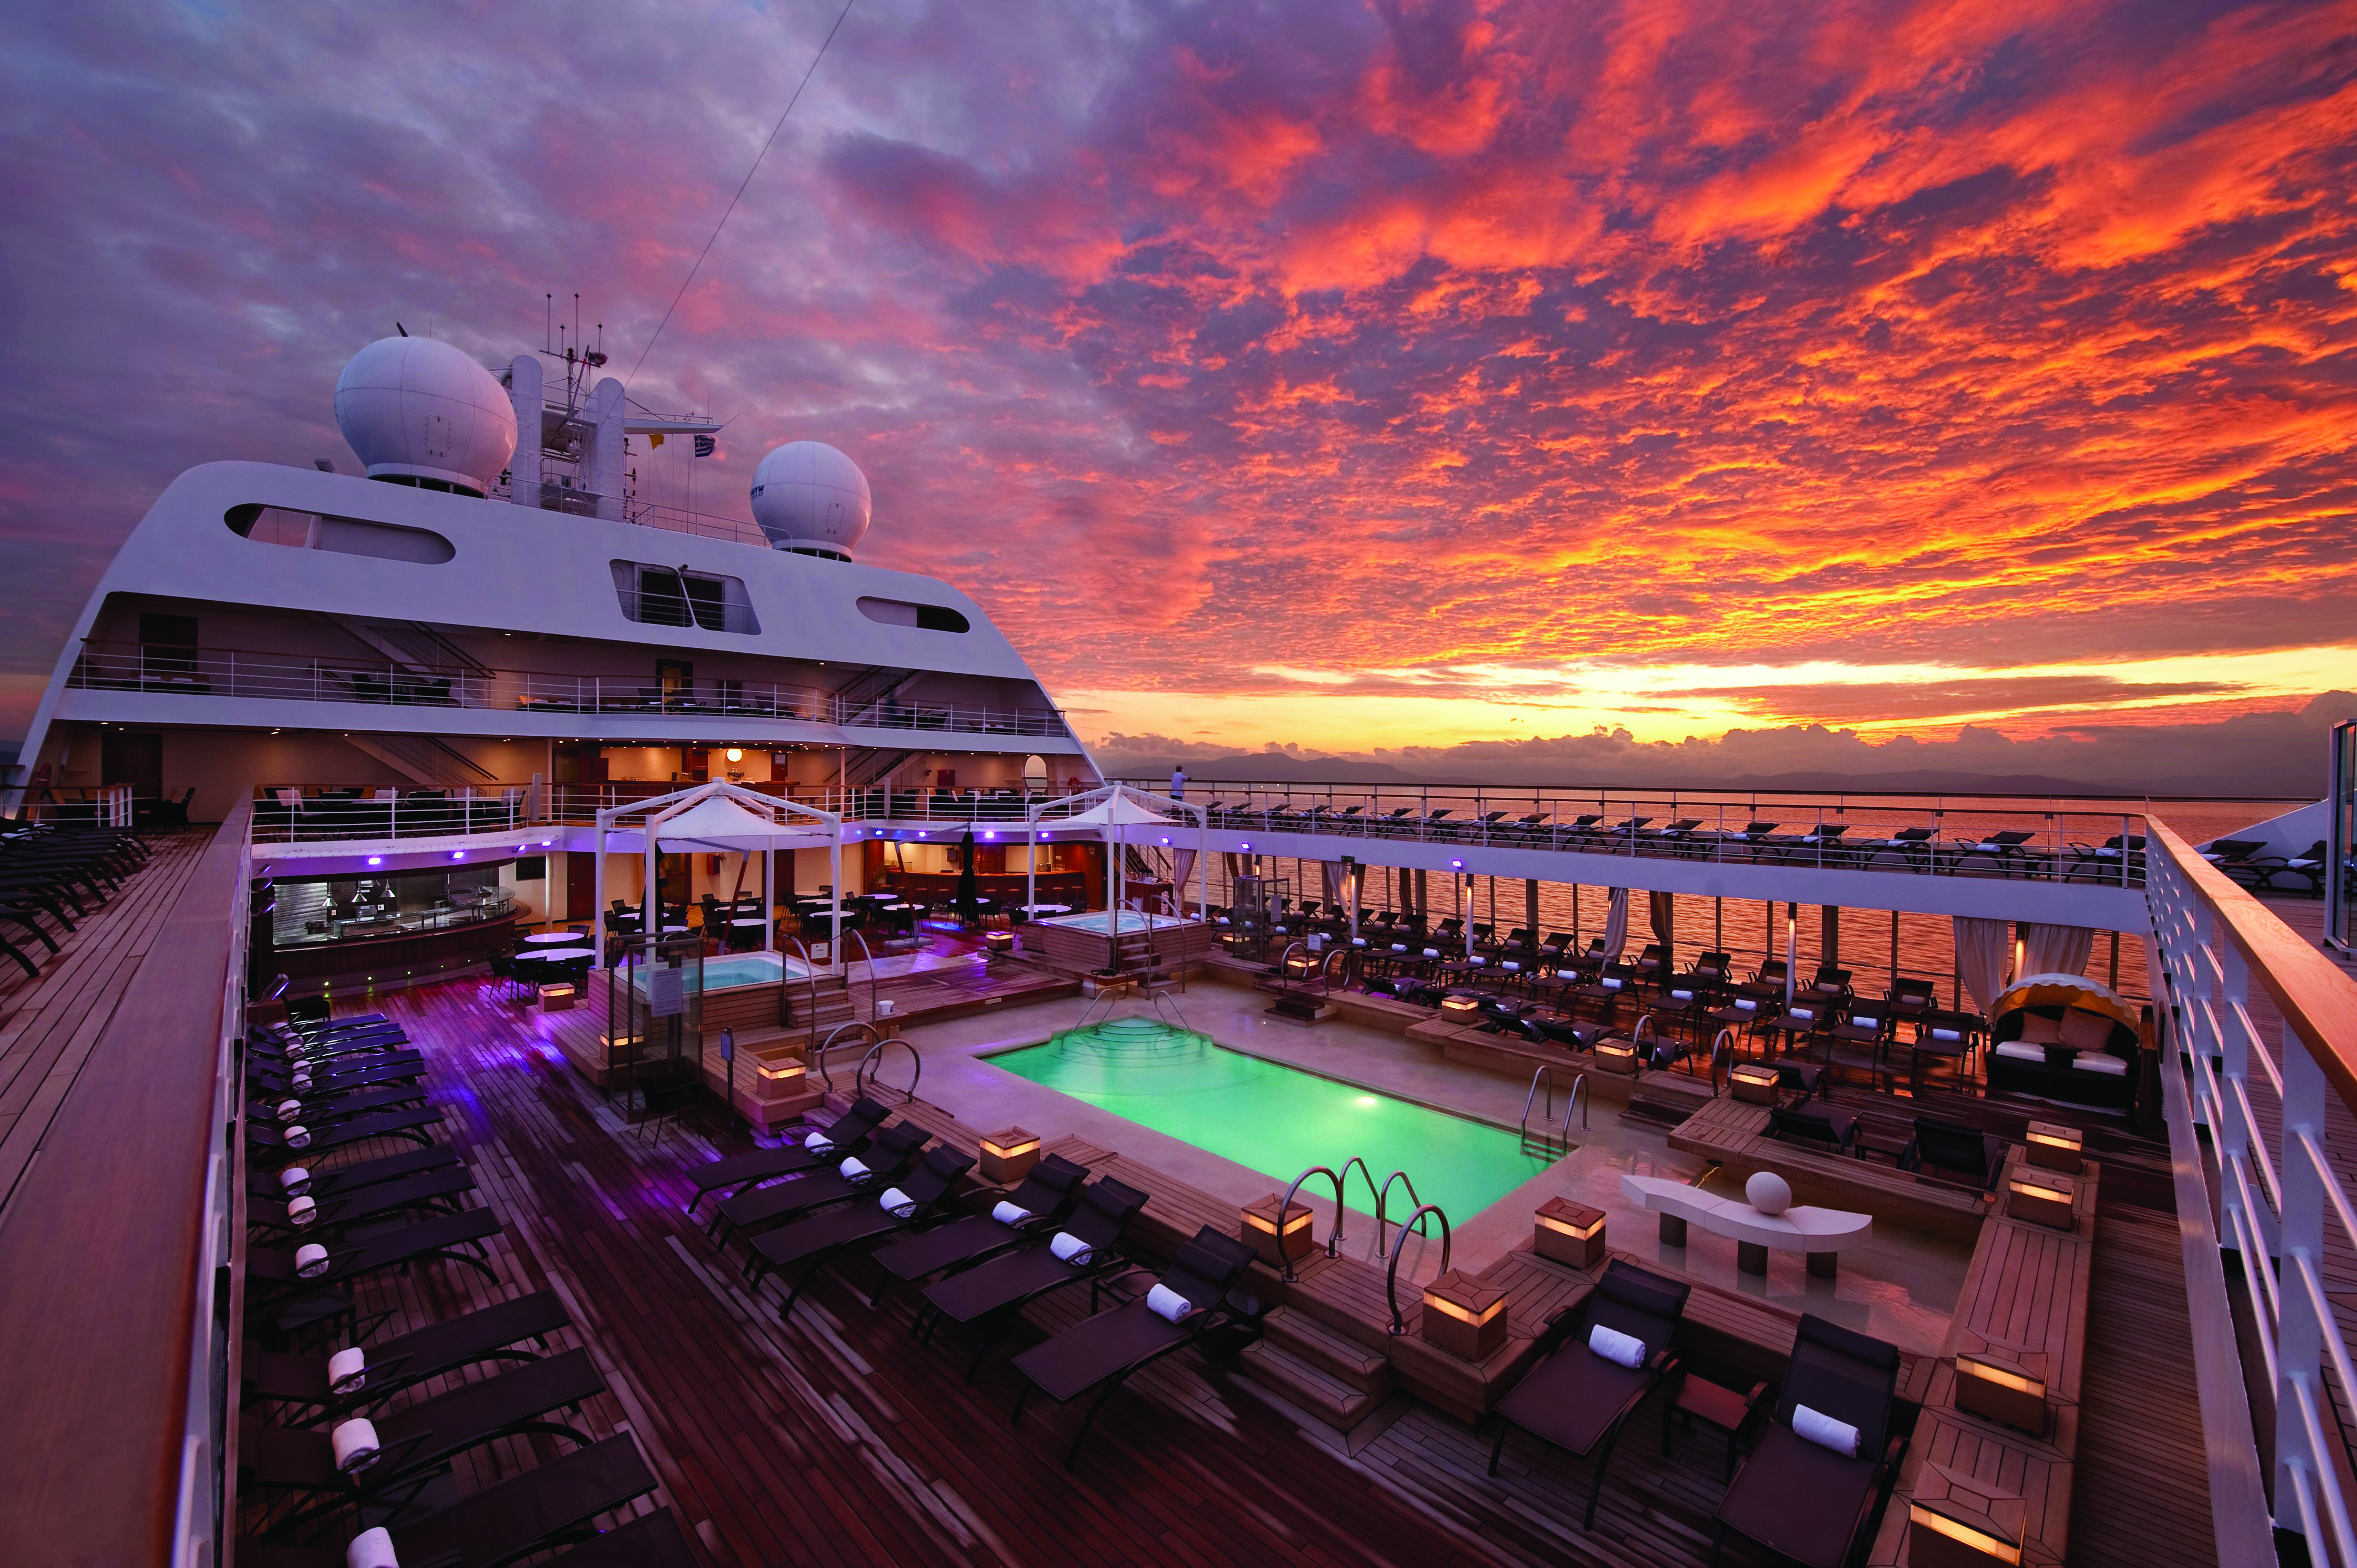 Pool Deck at Sunrise - Deck 8/9 Midship Seabourn Odyssey - Seabourn Cruise Line